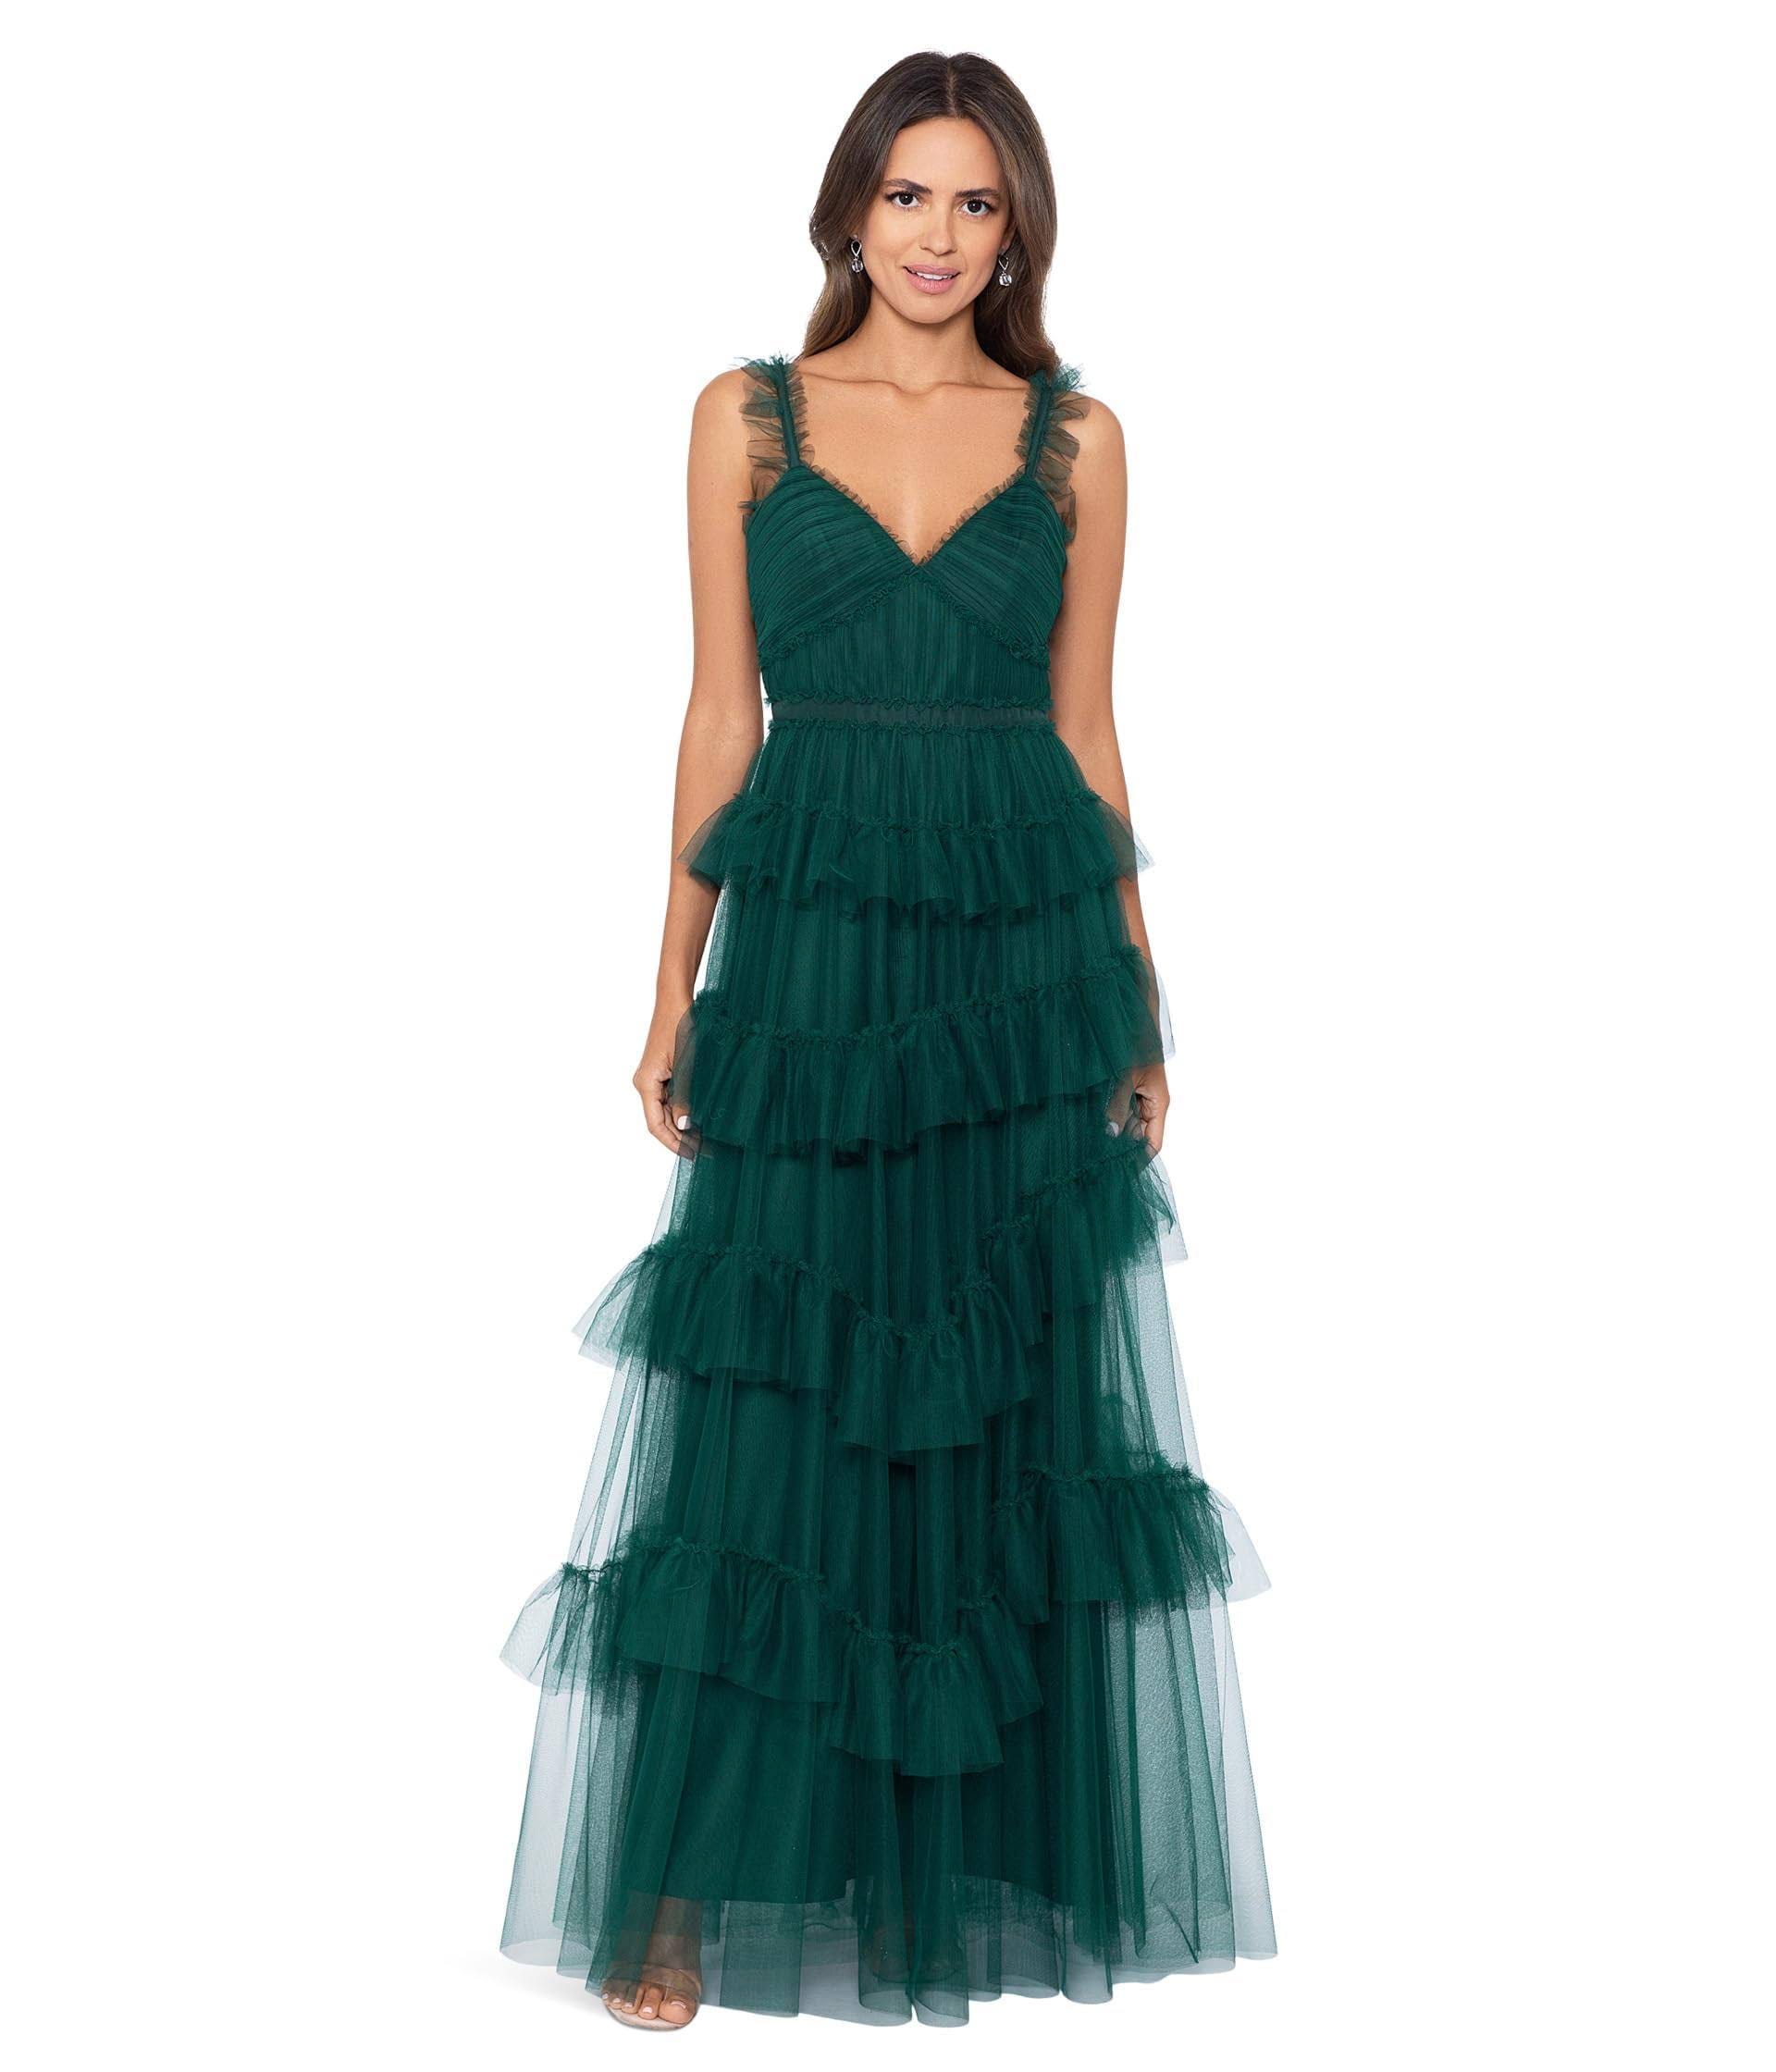 Tiered Mesh Maxi Dress with Ruffle Detailing | Image